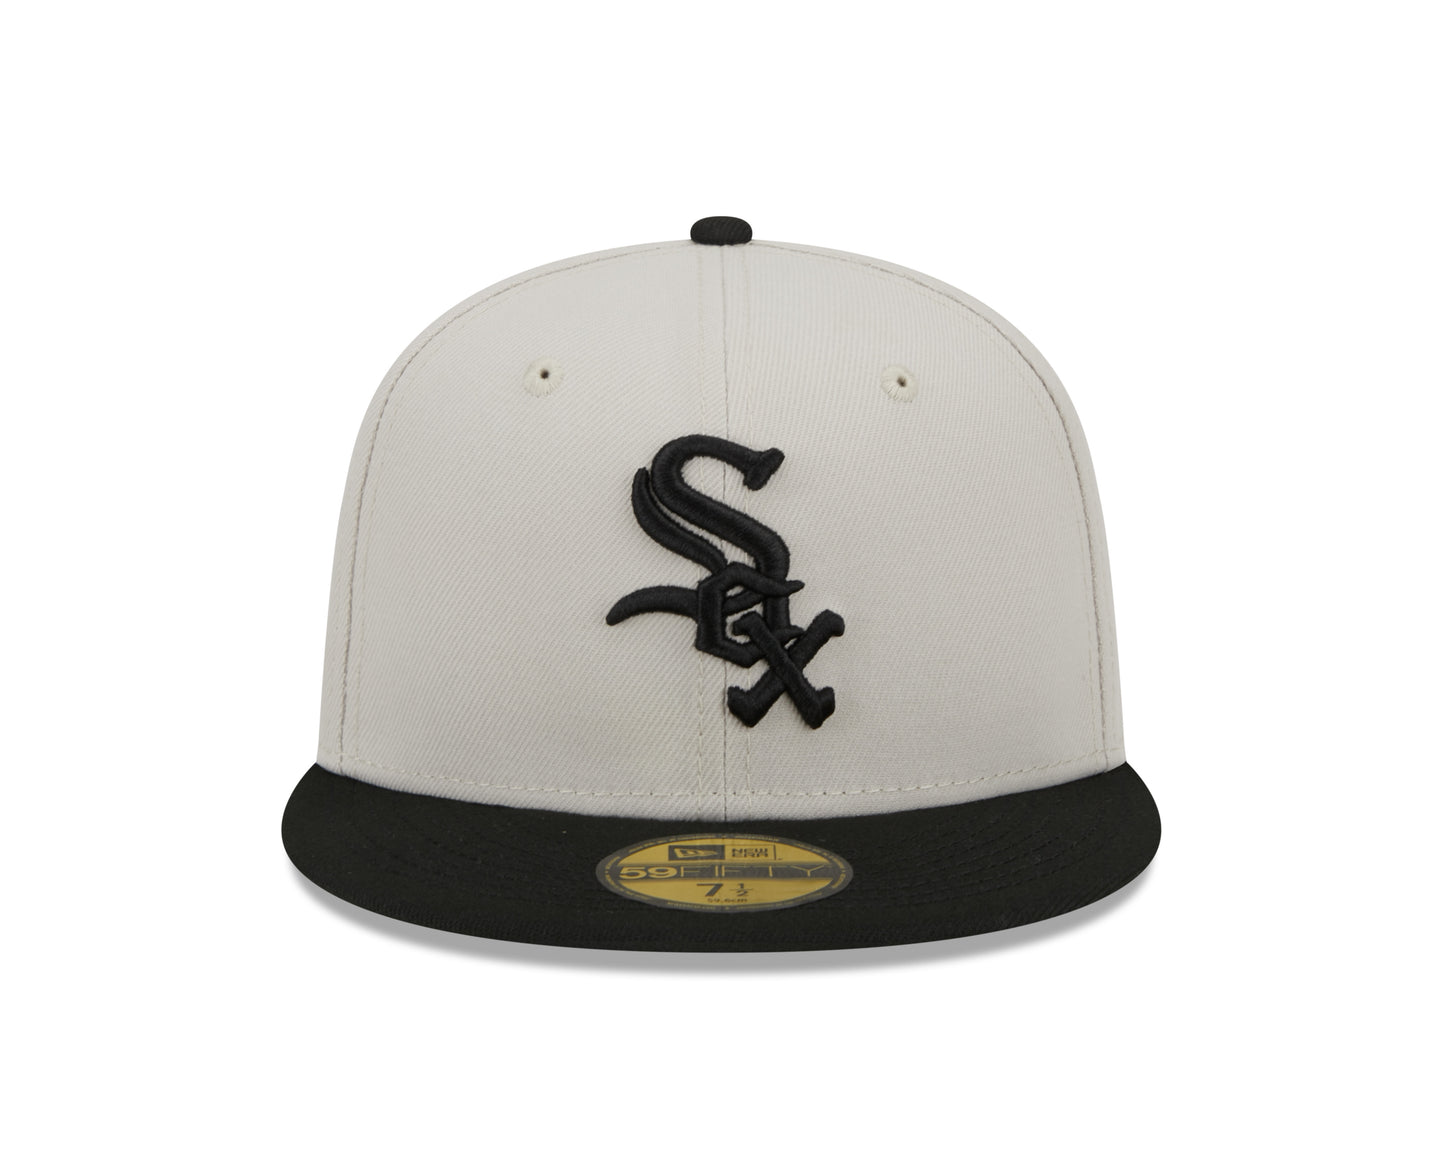 New Era - Chicago White Sox - 59Fifty Fitted - FARM TEAM - Stone - Headz Up 